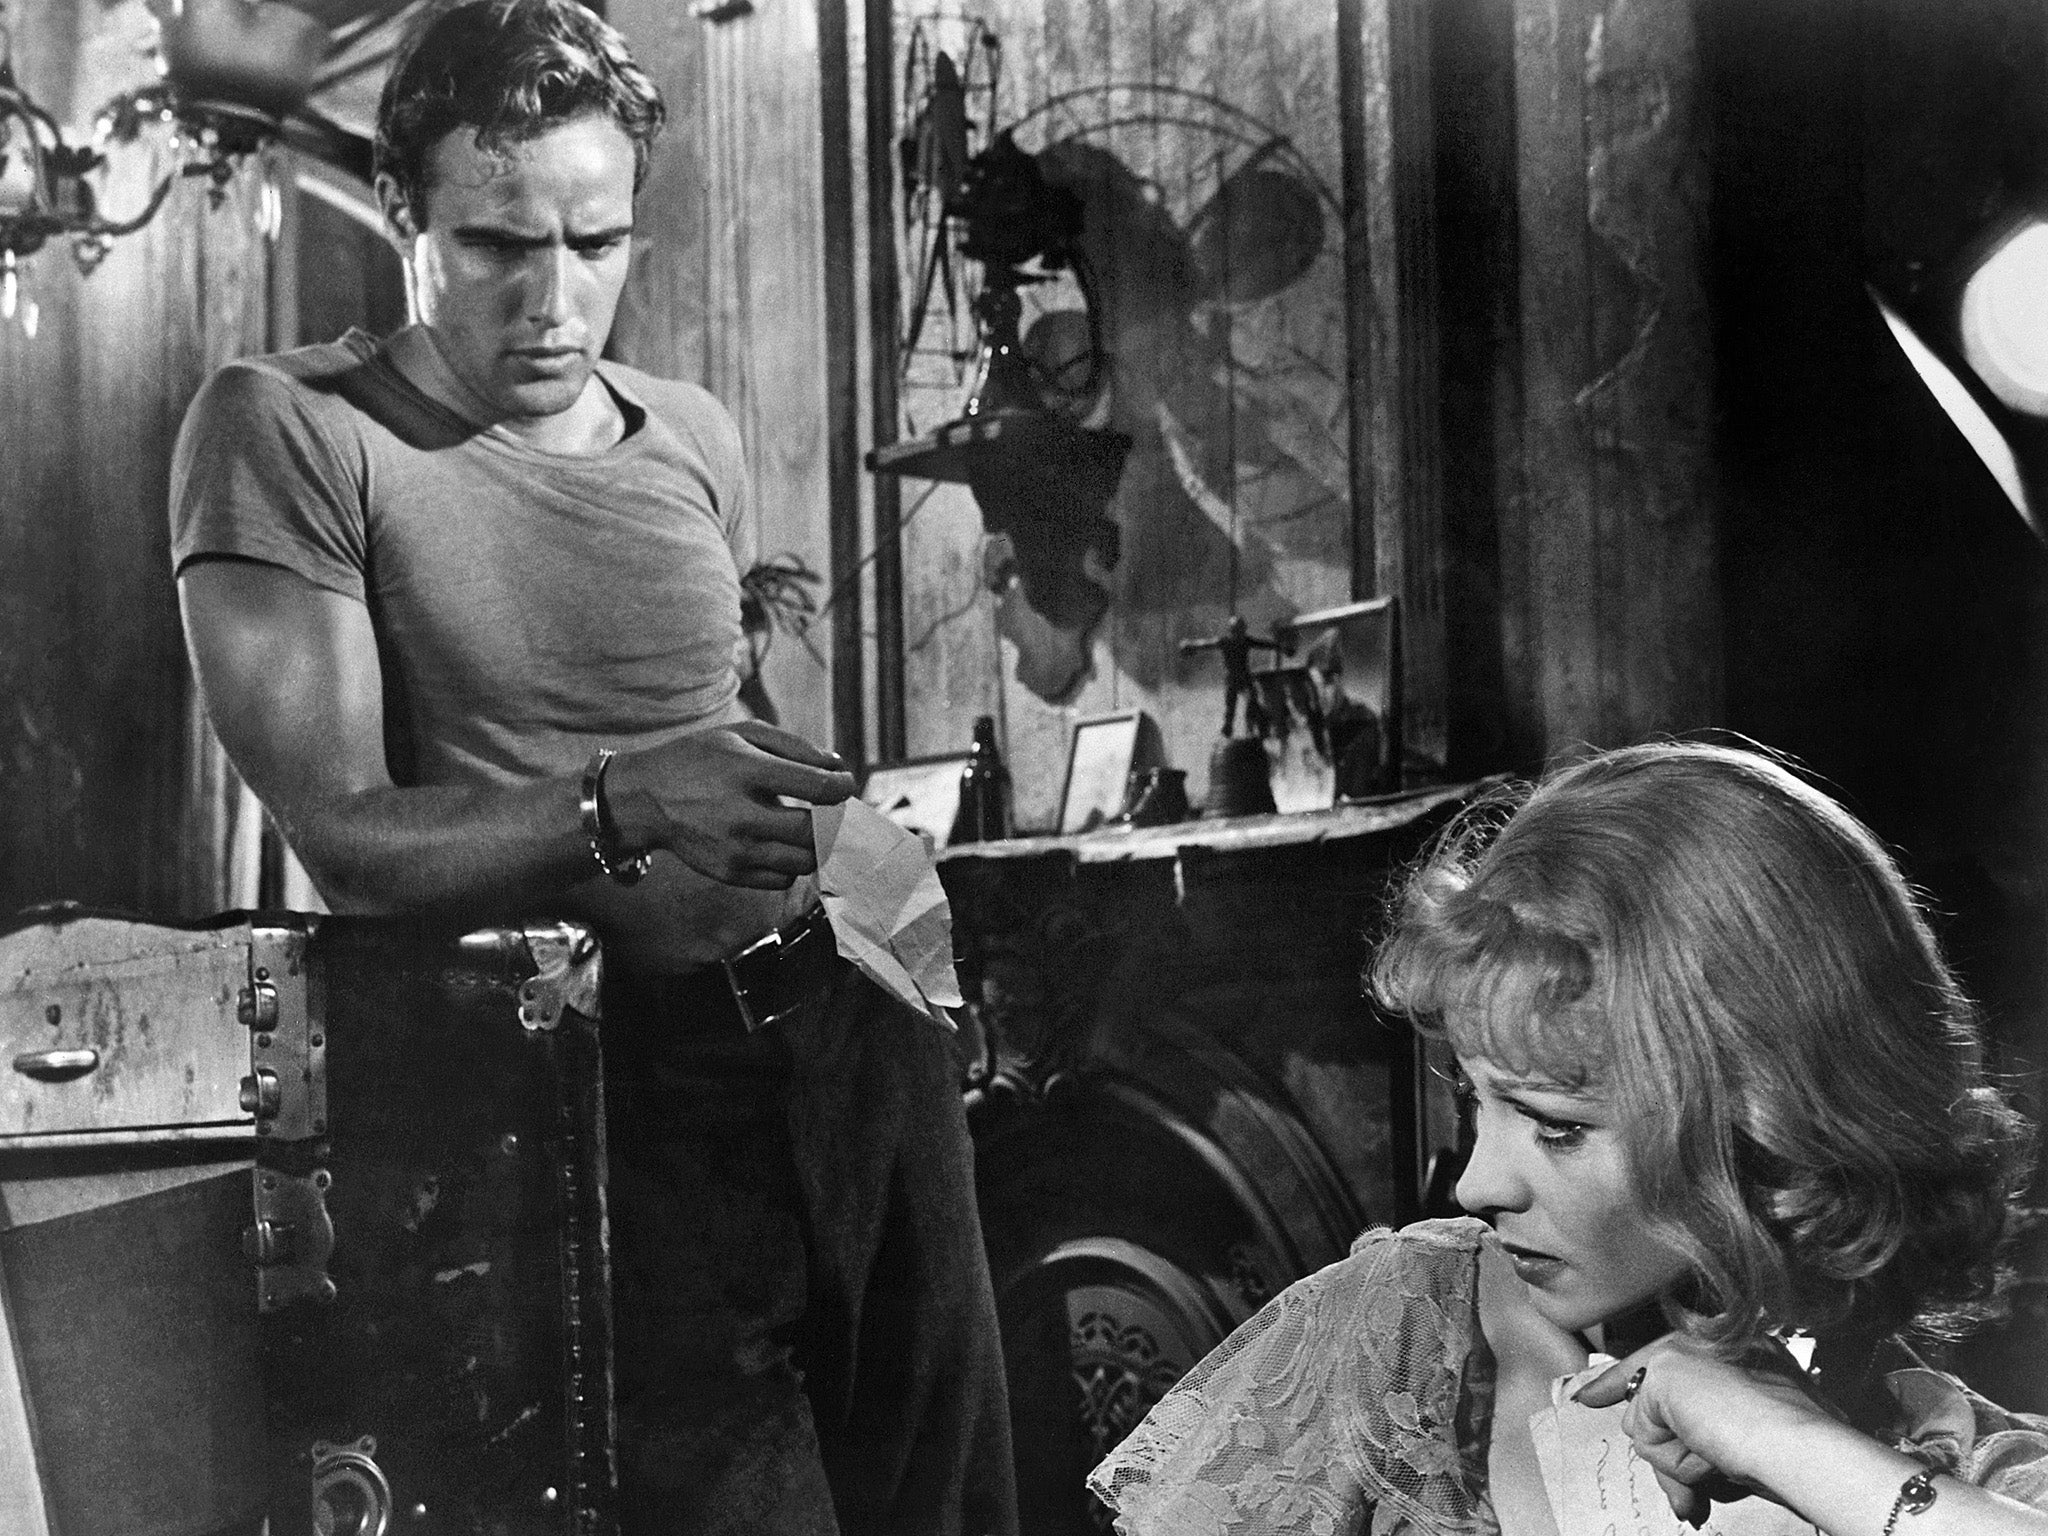 ‘A Streetcar Named Desire’ is perhaps a surprise addition to academic study